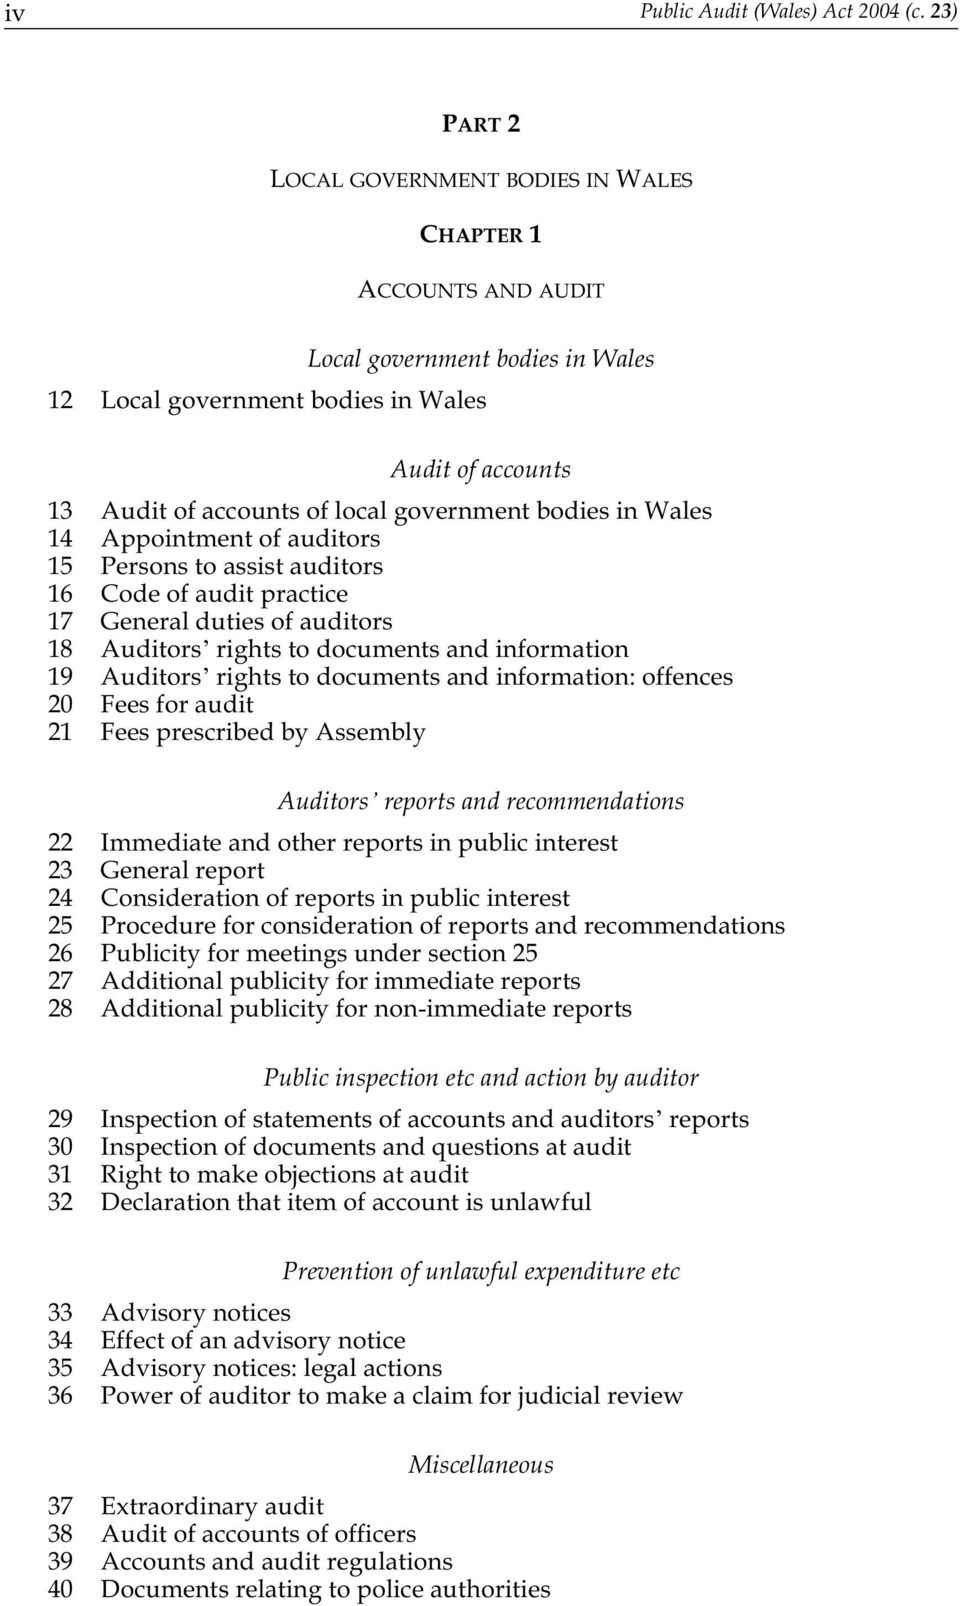 government bodies in Wales 14 Appointment of auditors 15 Persons to assist auditors 16 Code of audit practice 17 General duties of auditors 18 Auditors rights to documents and information 19 Auditors